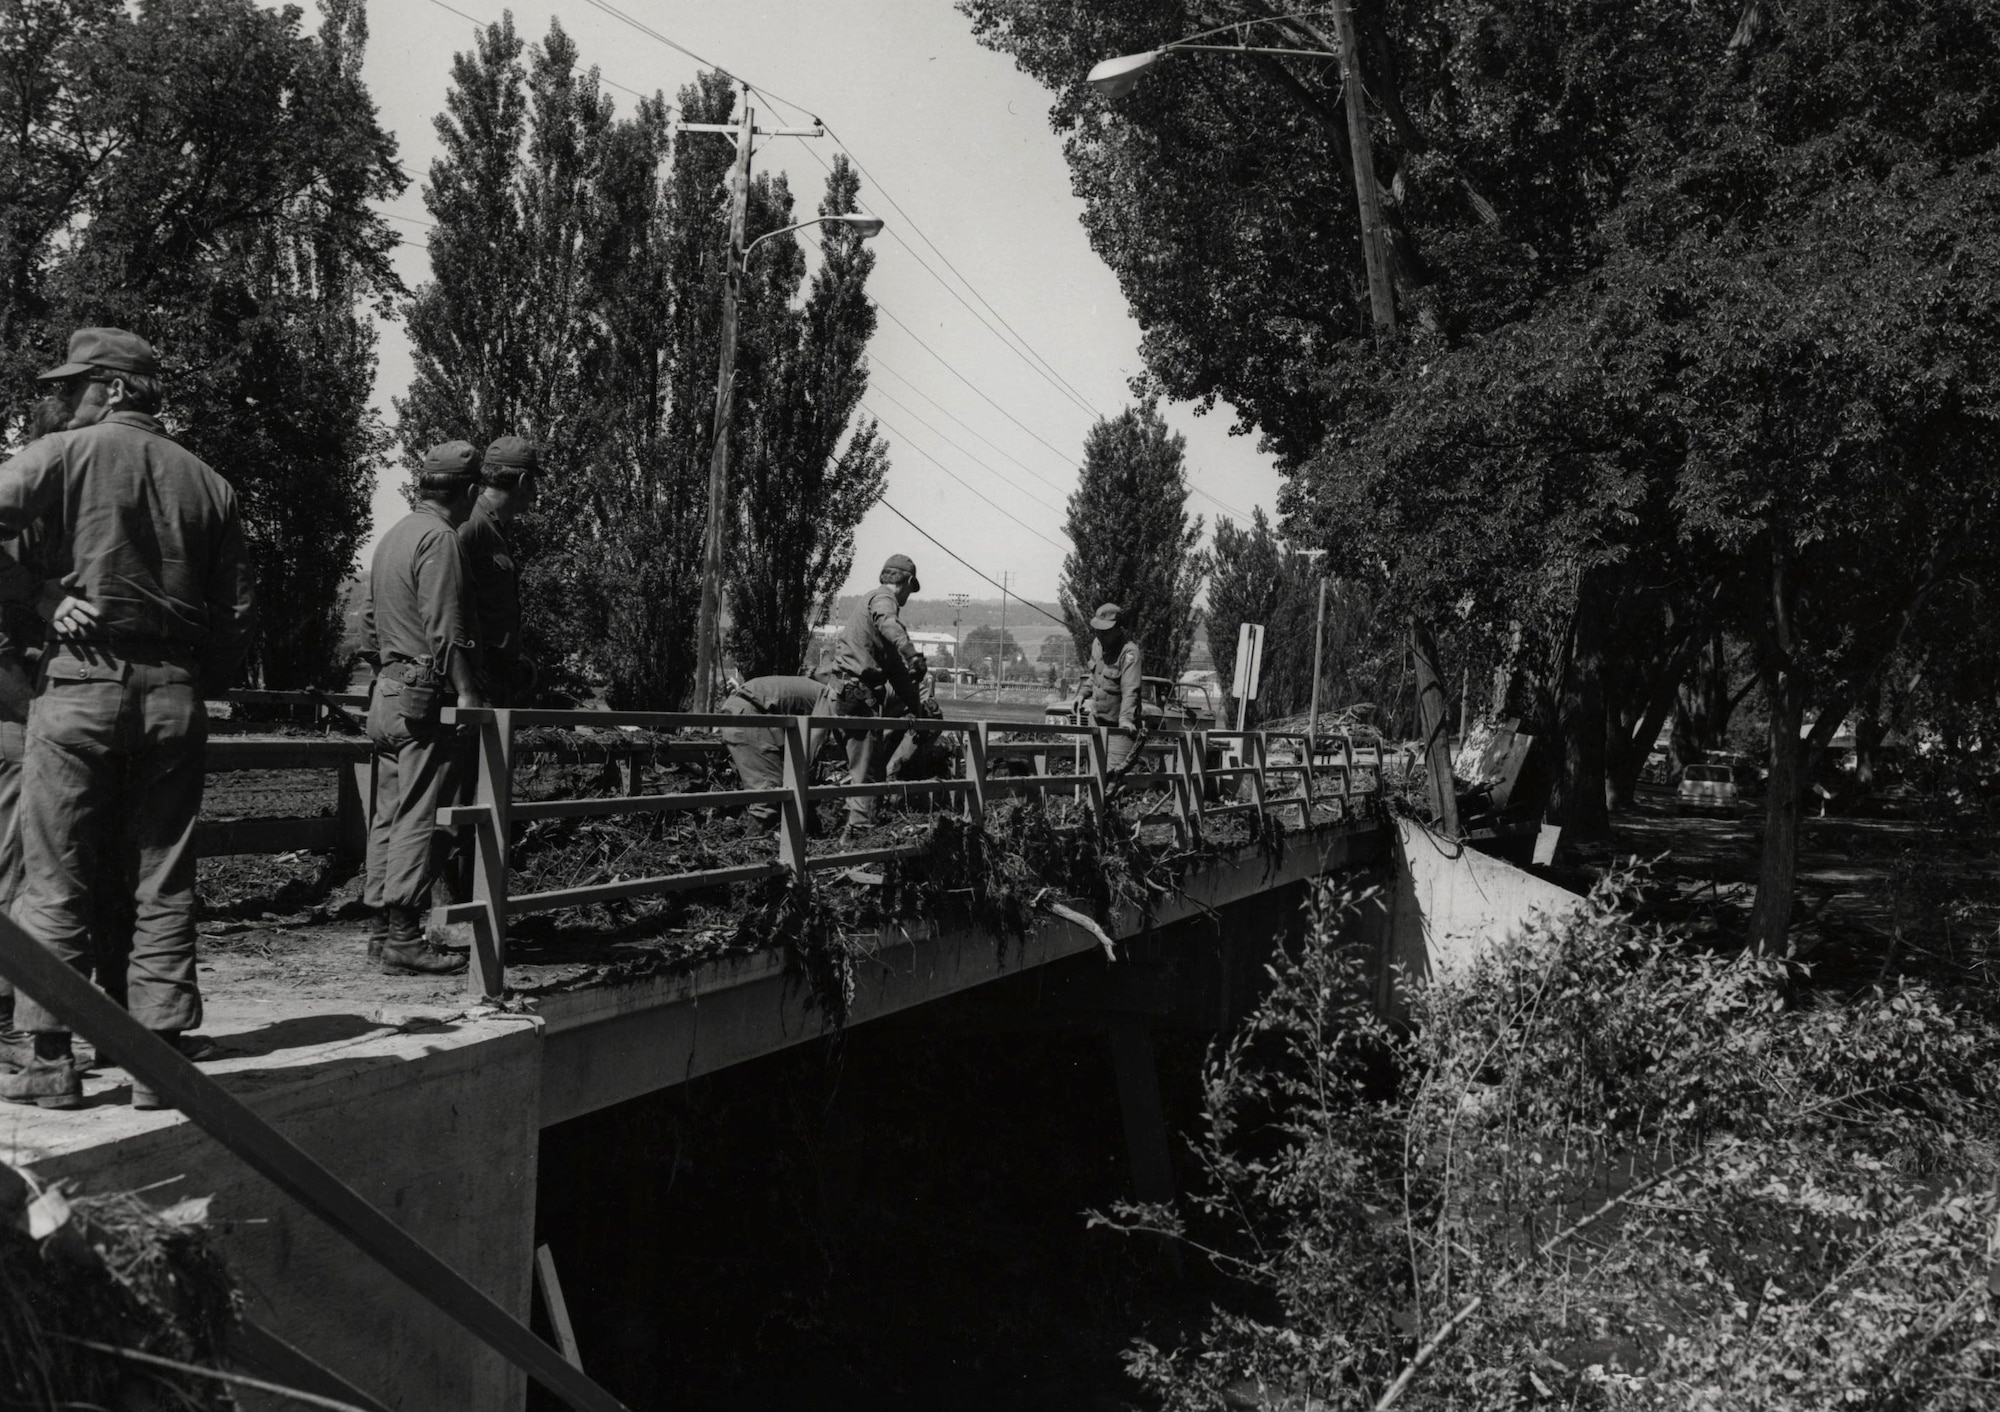 Ellsworth Airmen clear fallen trees from a bridge after the flood in Rapid City, S.D., June 11, 1972. In addition to providing equipment, supplies and support, Ellsworth’s Family Services staff set up a relief station in the Base Community Center, offering free clothing, food and shelter to disaster victims. (U.S. Air Force courtesy photo)